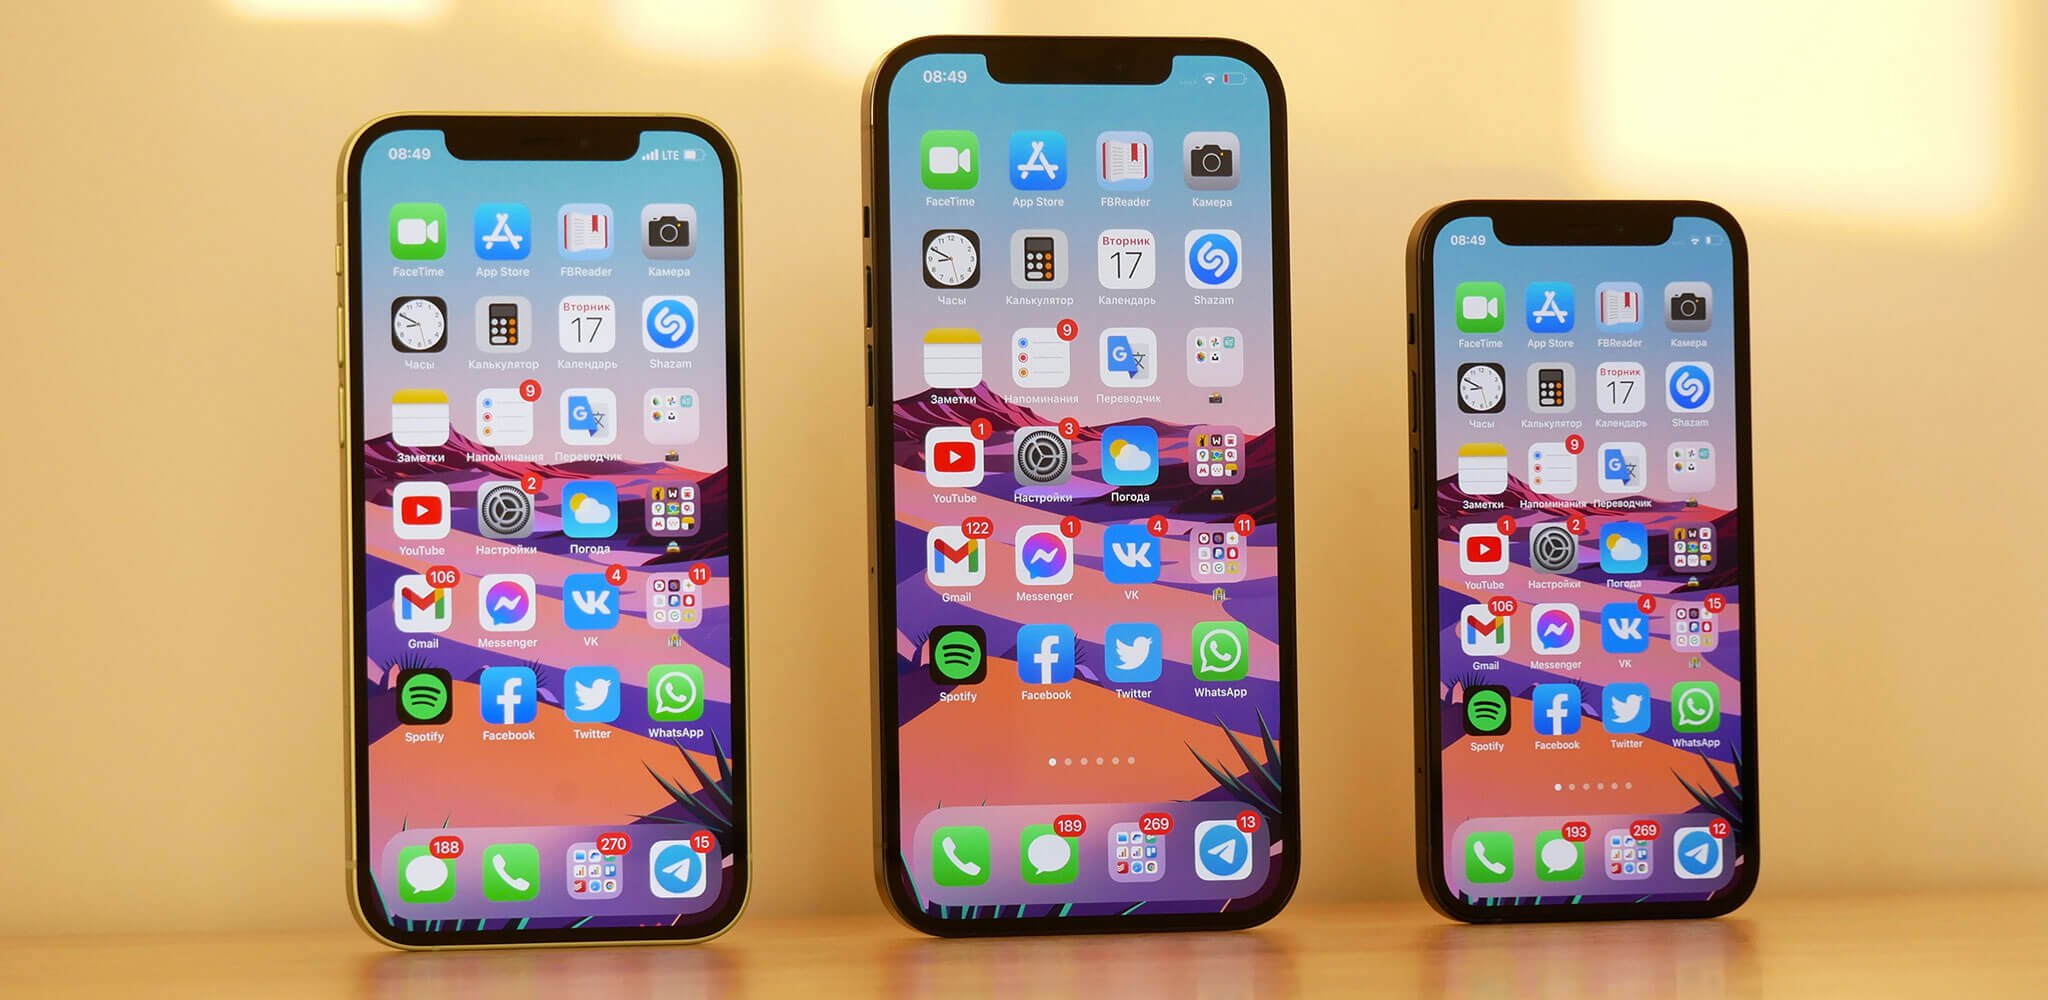 Photo of iphone 12 and iPhone 12 pro on a table